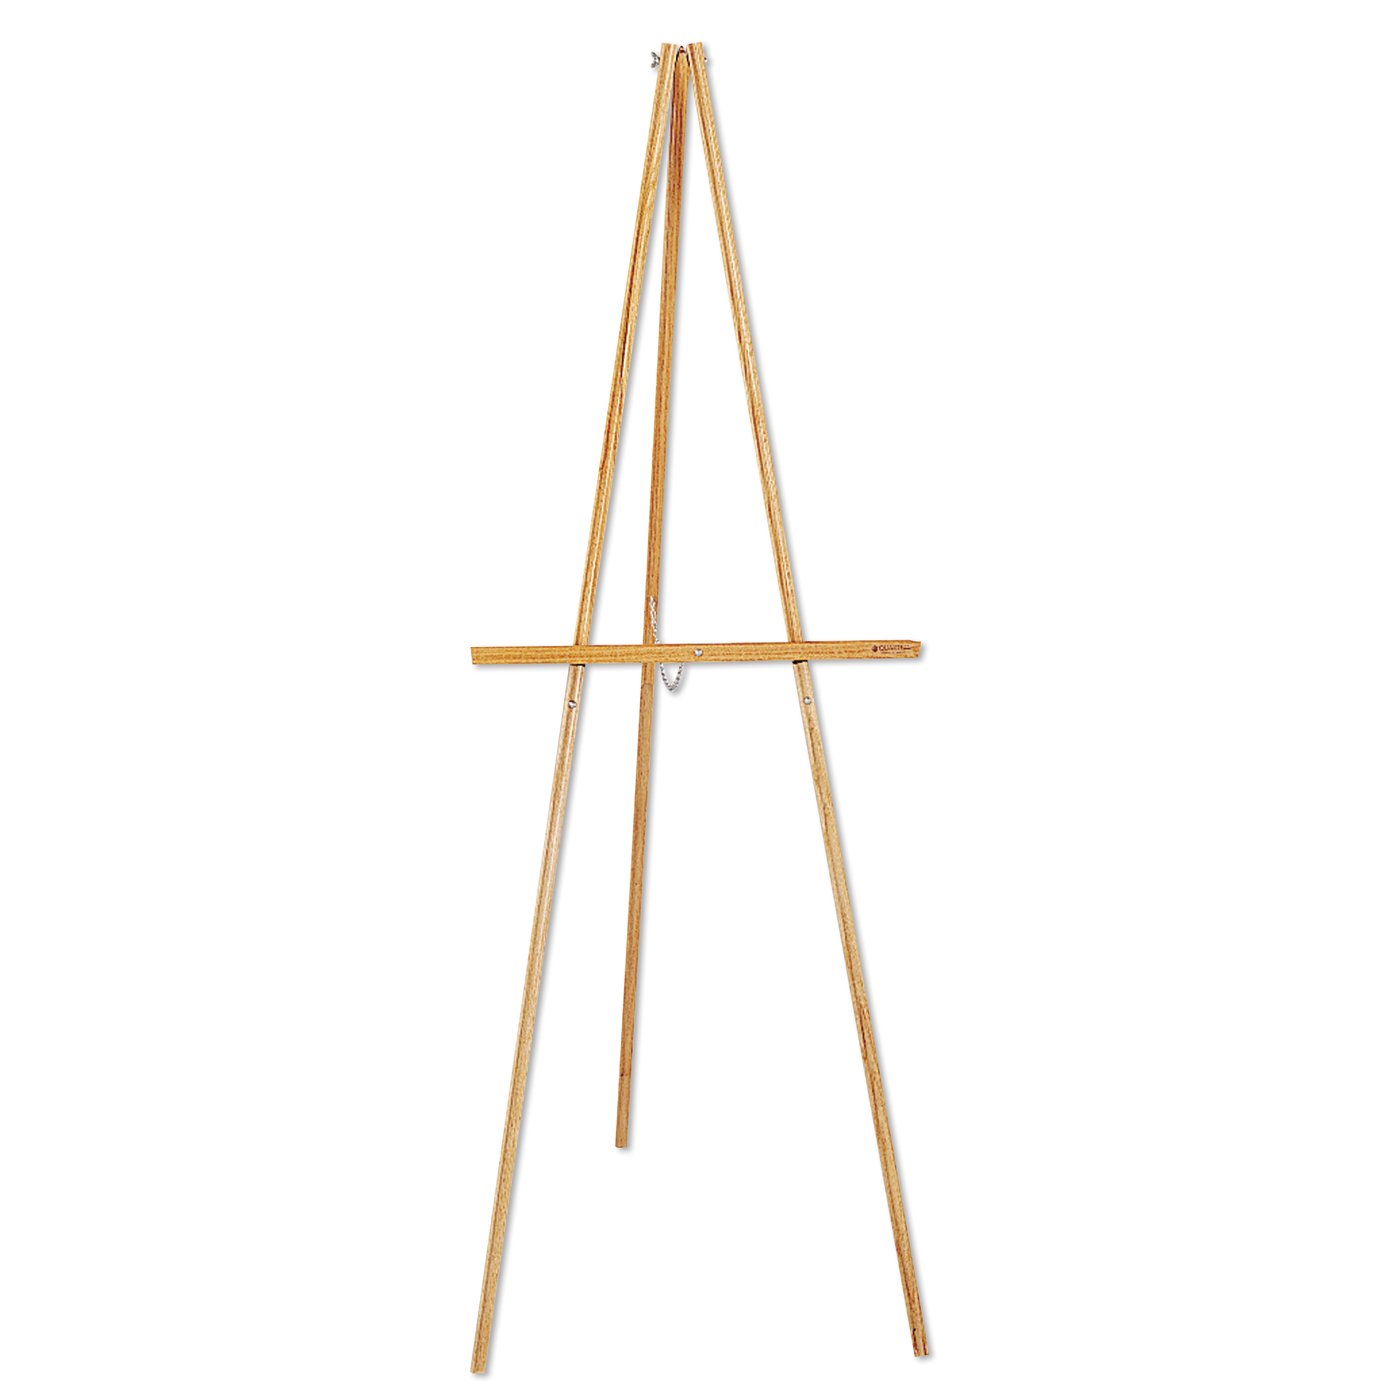 Wooden easel photo